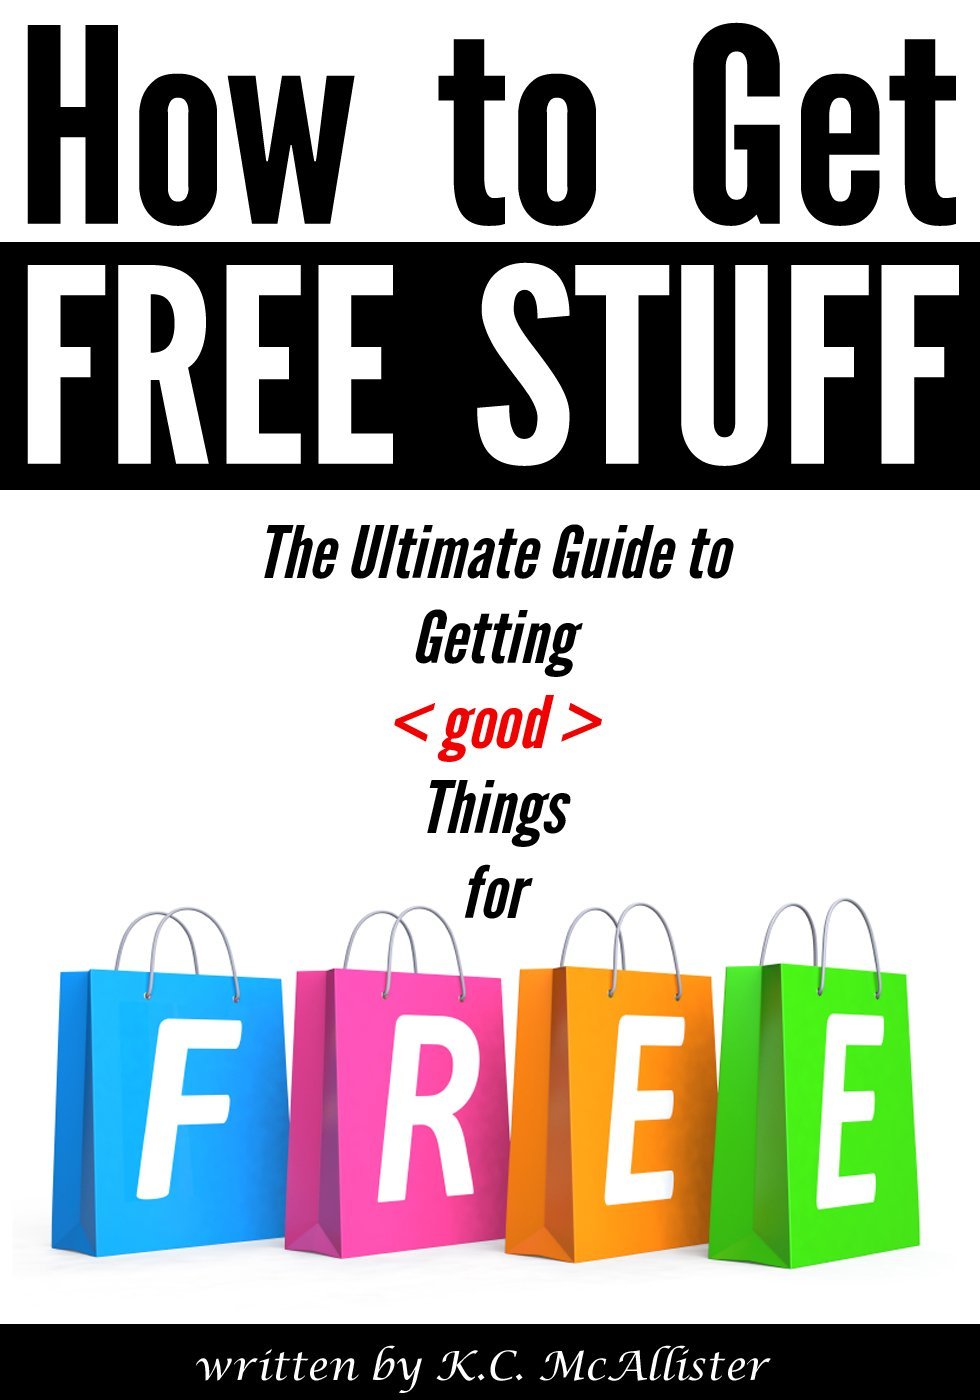 How to Get Free Stuff: The Ultimate Guide to Getting Things for Free (freecycle, freebees, free things, free samples, freebie, freestuff) by K.C. McAllister